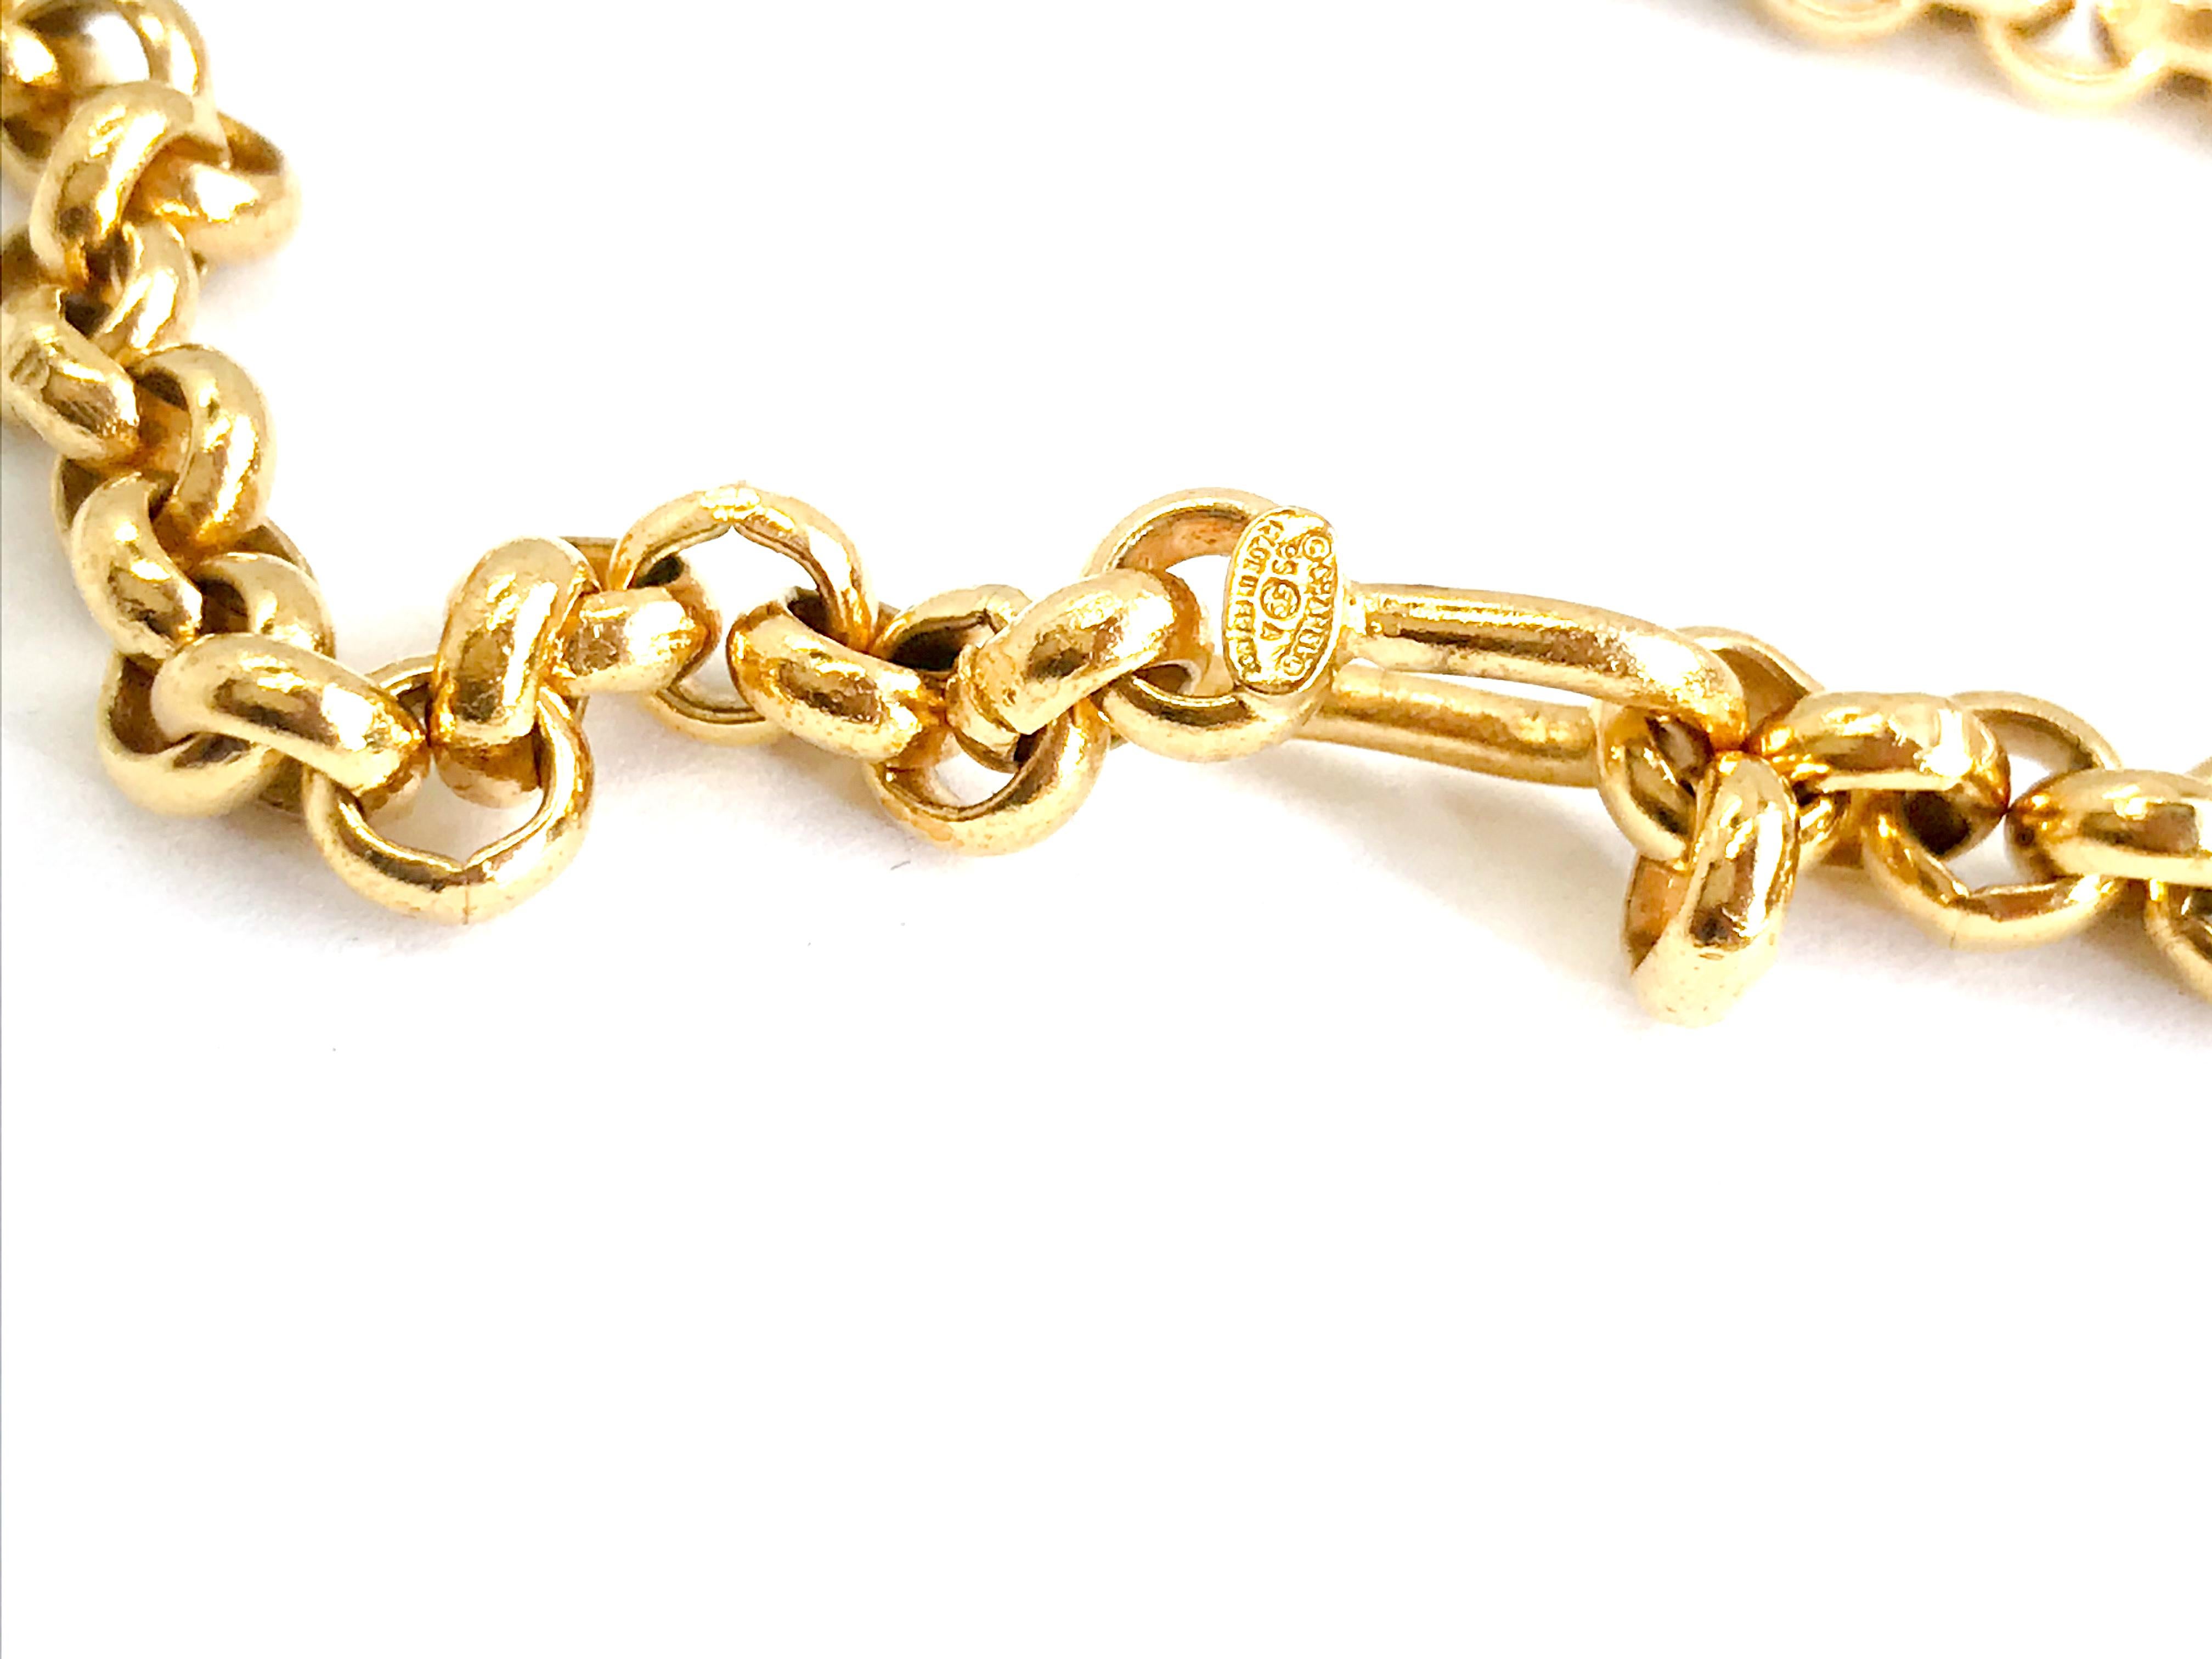 Chanel 1990s Gold Plated Belcher Chain.

Signed Chanel 95 A.  Denoting manufacture for the 1995 Autumn winter collection.

